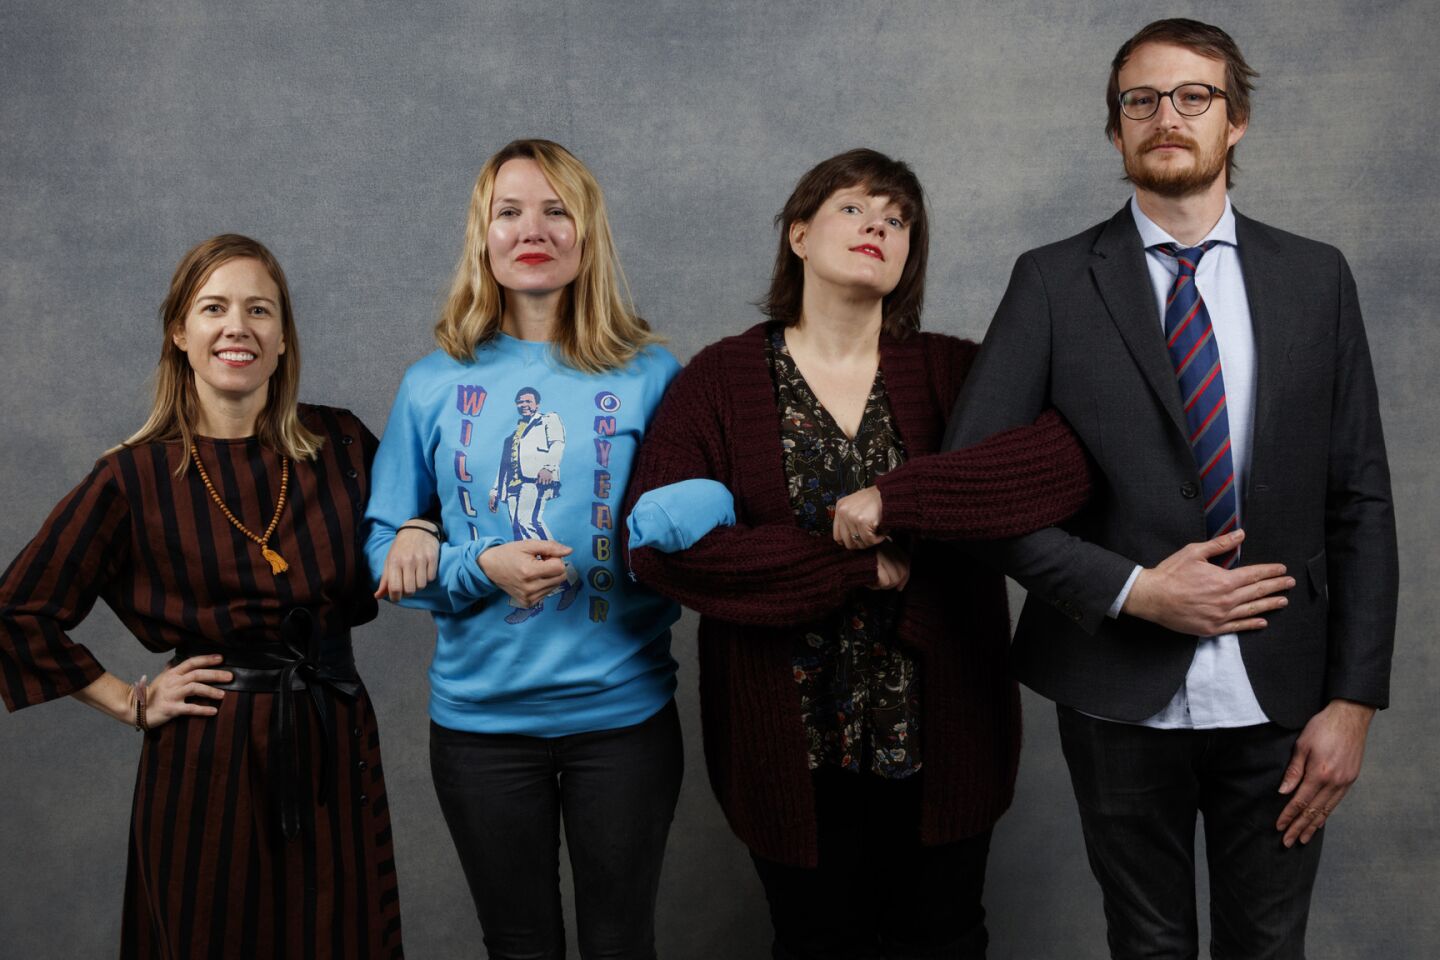 From left, producer Christine Beebe, director Amy Scott, composer Heather McIntosh and producer Brian Morrow from the film "Hal," photographed in the L.A. Times Studio during the Sundance Film Festival in Park City, Utah, Jan. 20, 2018.